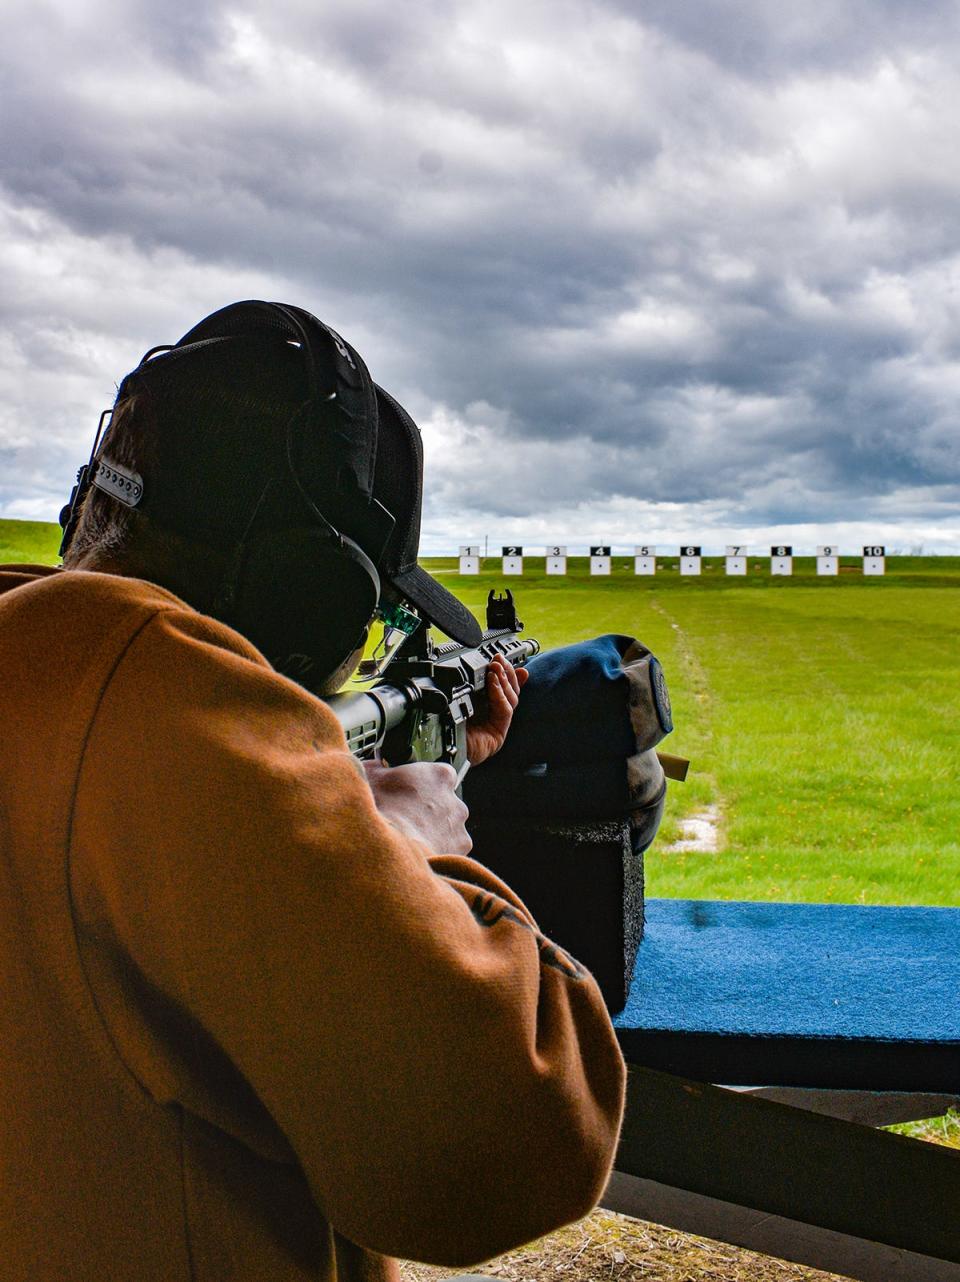 A competitor takes aim downrange on Petrarca Range. The range is open most Mondays to the public